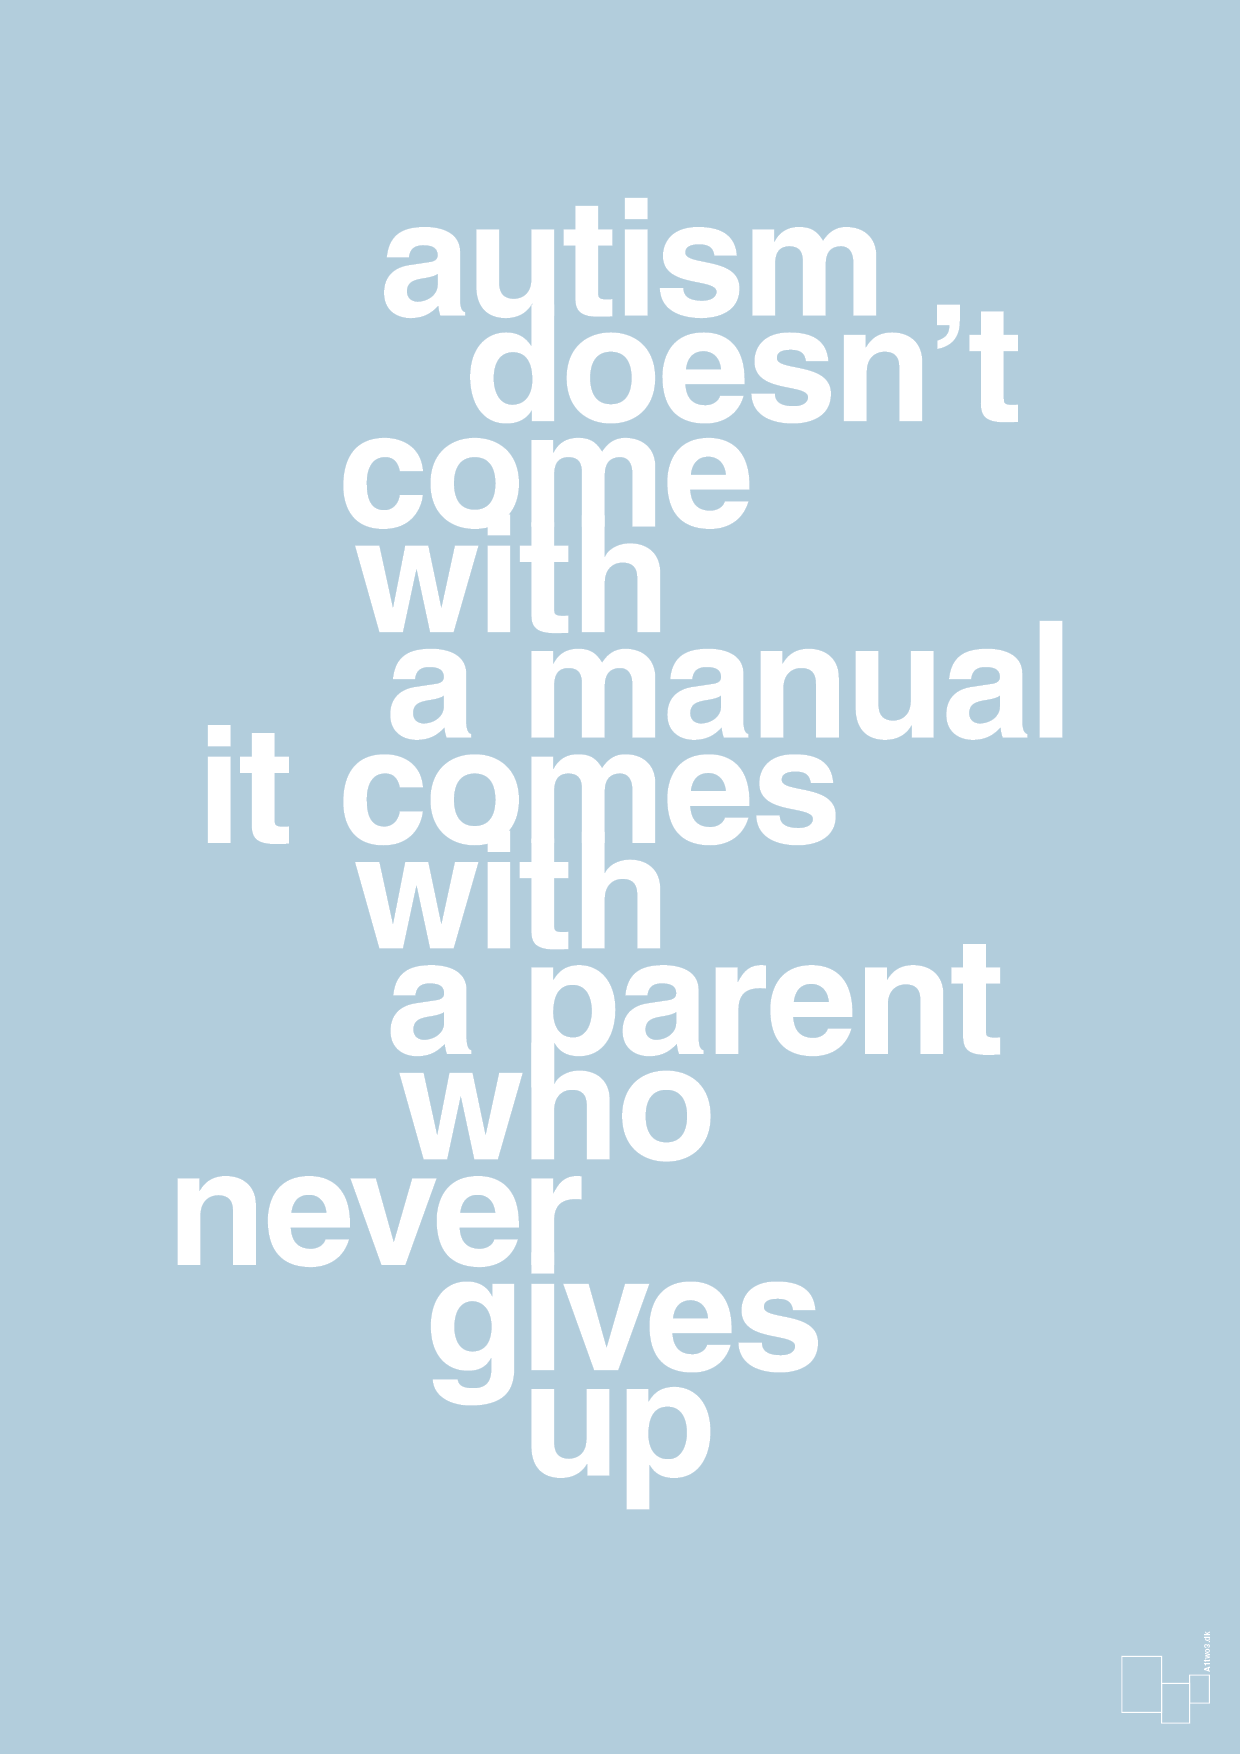 autism doesnt come with a manual it comes with a parent who never gives up - Plakat med Samfund i Heavenly Blue